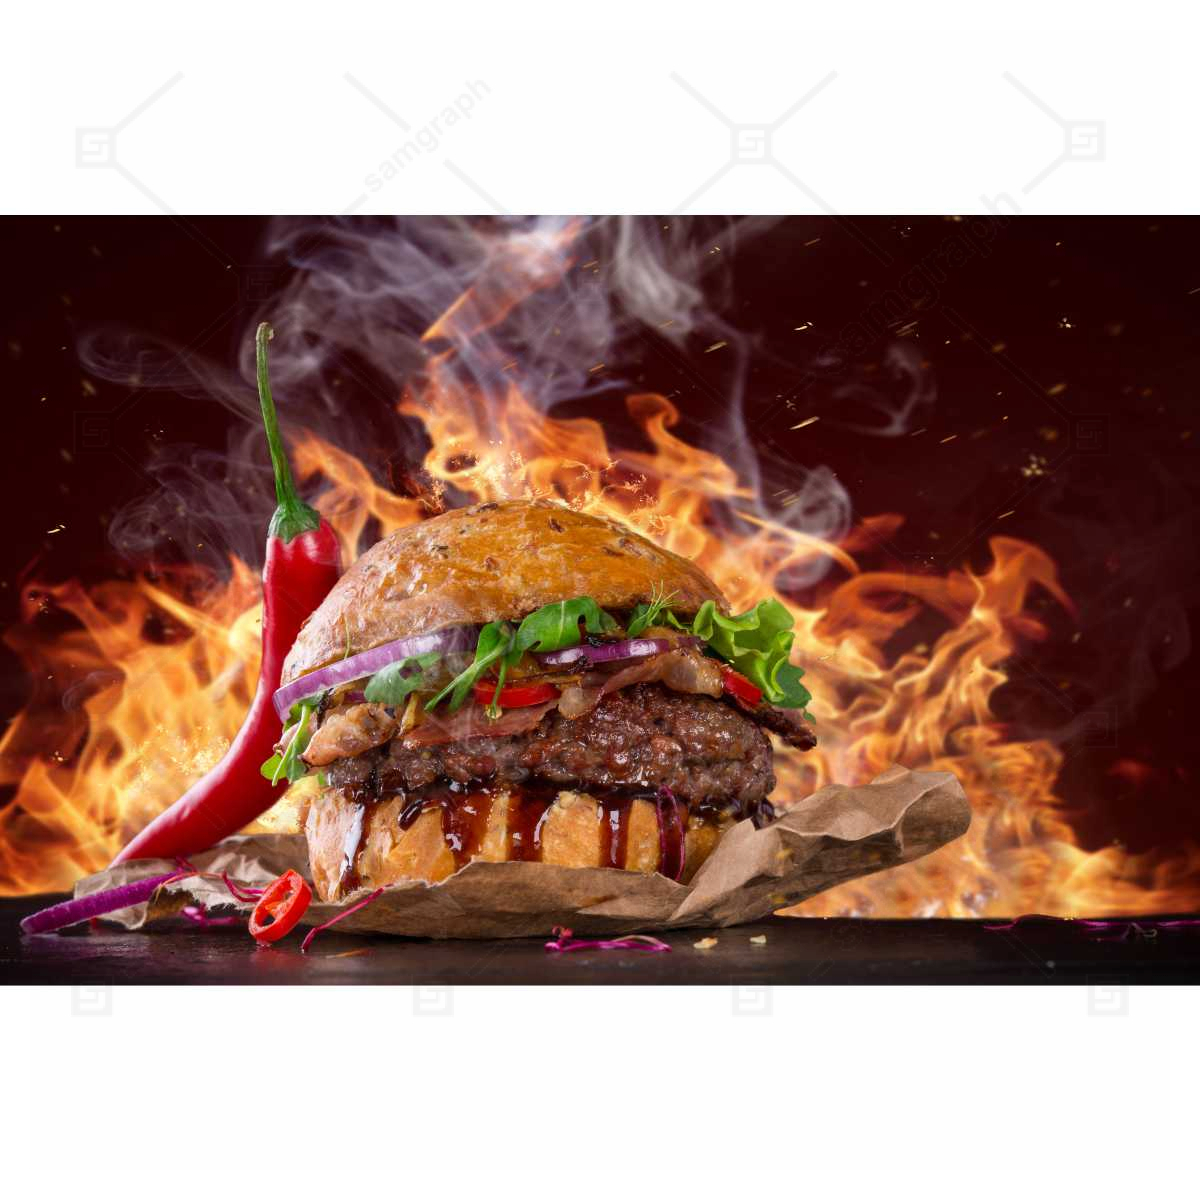 High quality photo of juicy hamburger with fire and pepper lettuce onion parsley 2 1 آیکون ذخیره سازی